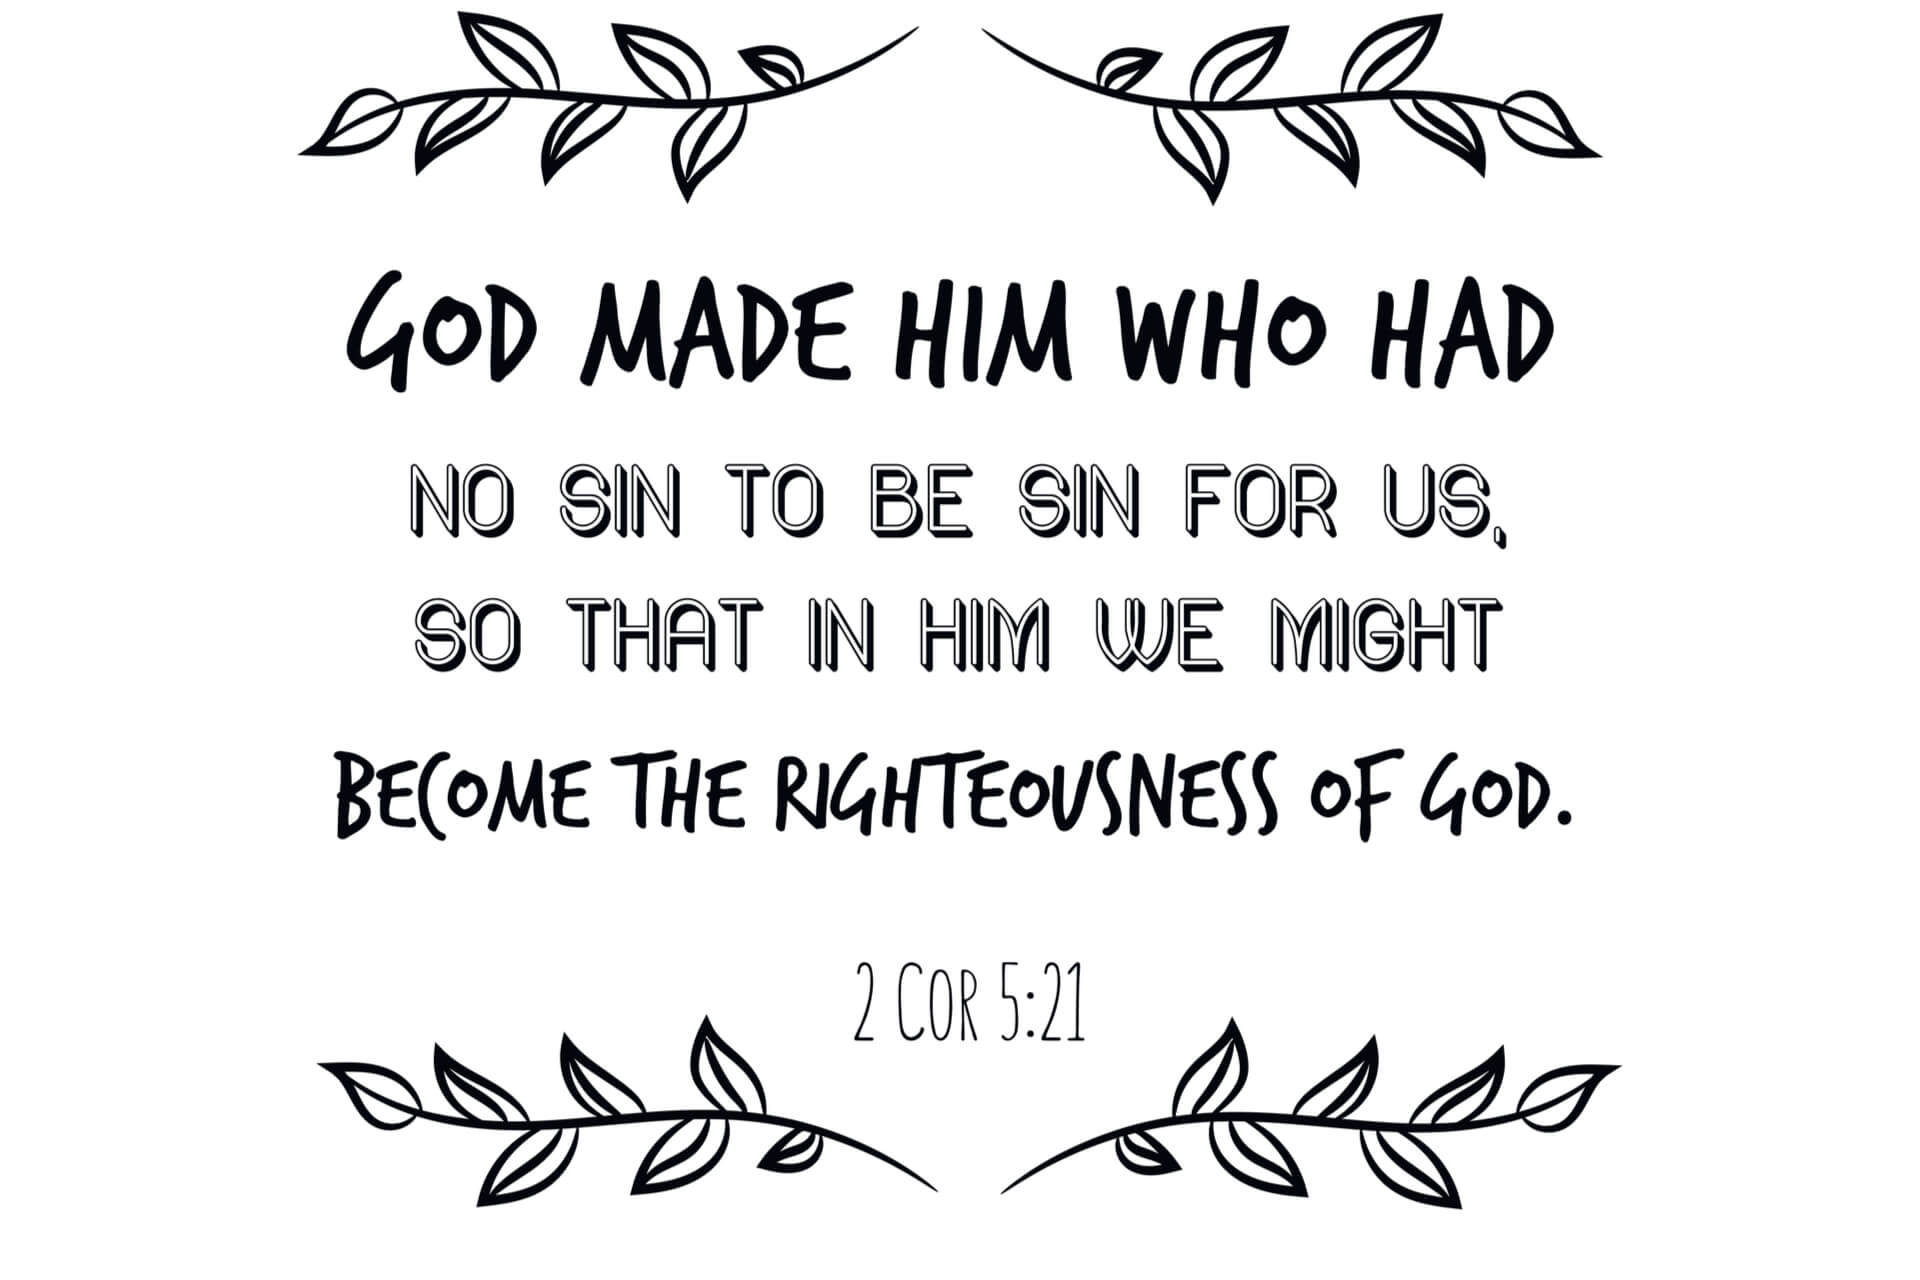 God made him who had no sin to be sin for us, so that in him we might become the righteousness of God